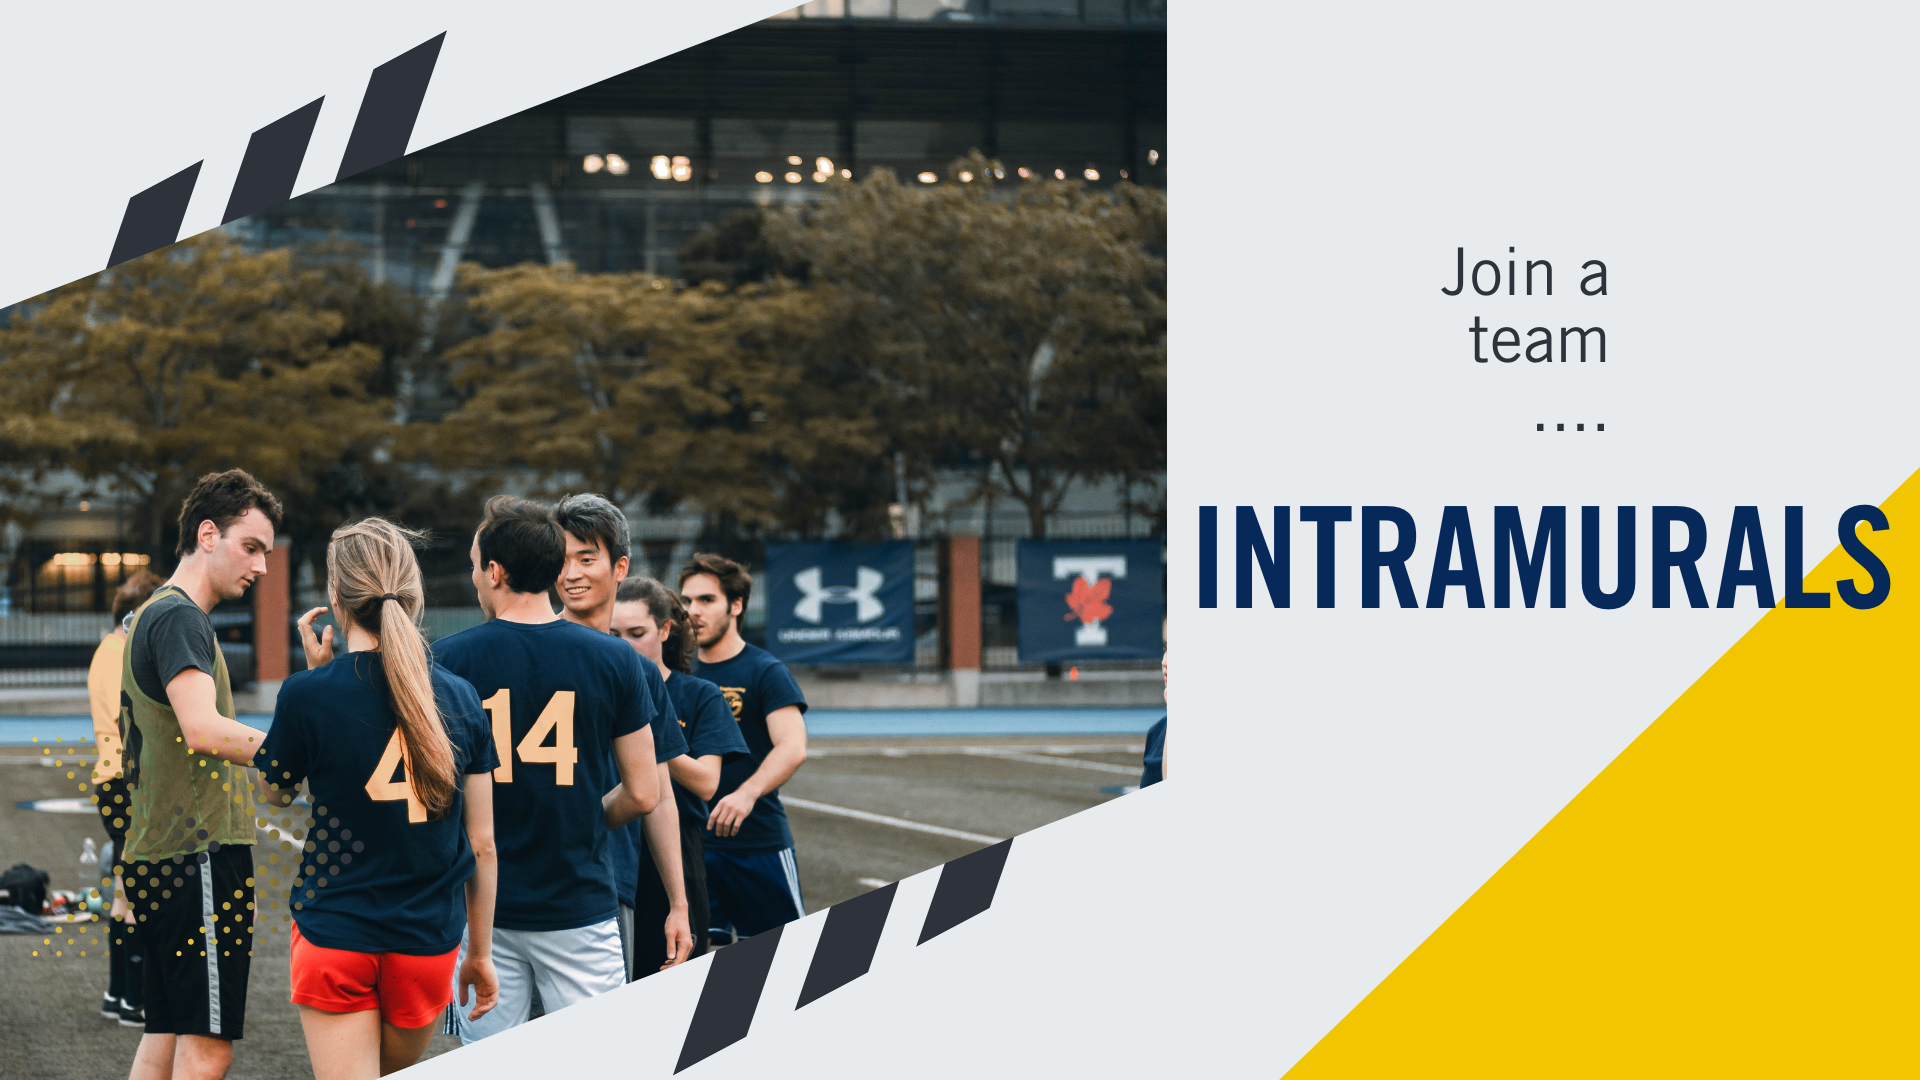 Image showcasing Intramural Sports depicts a group of people in a huddle on an outdoor turf field